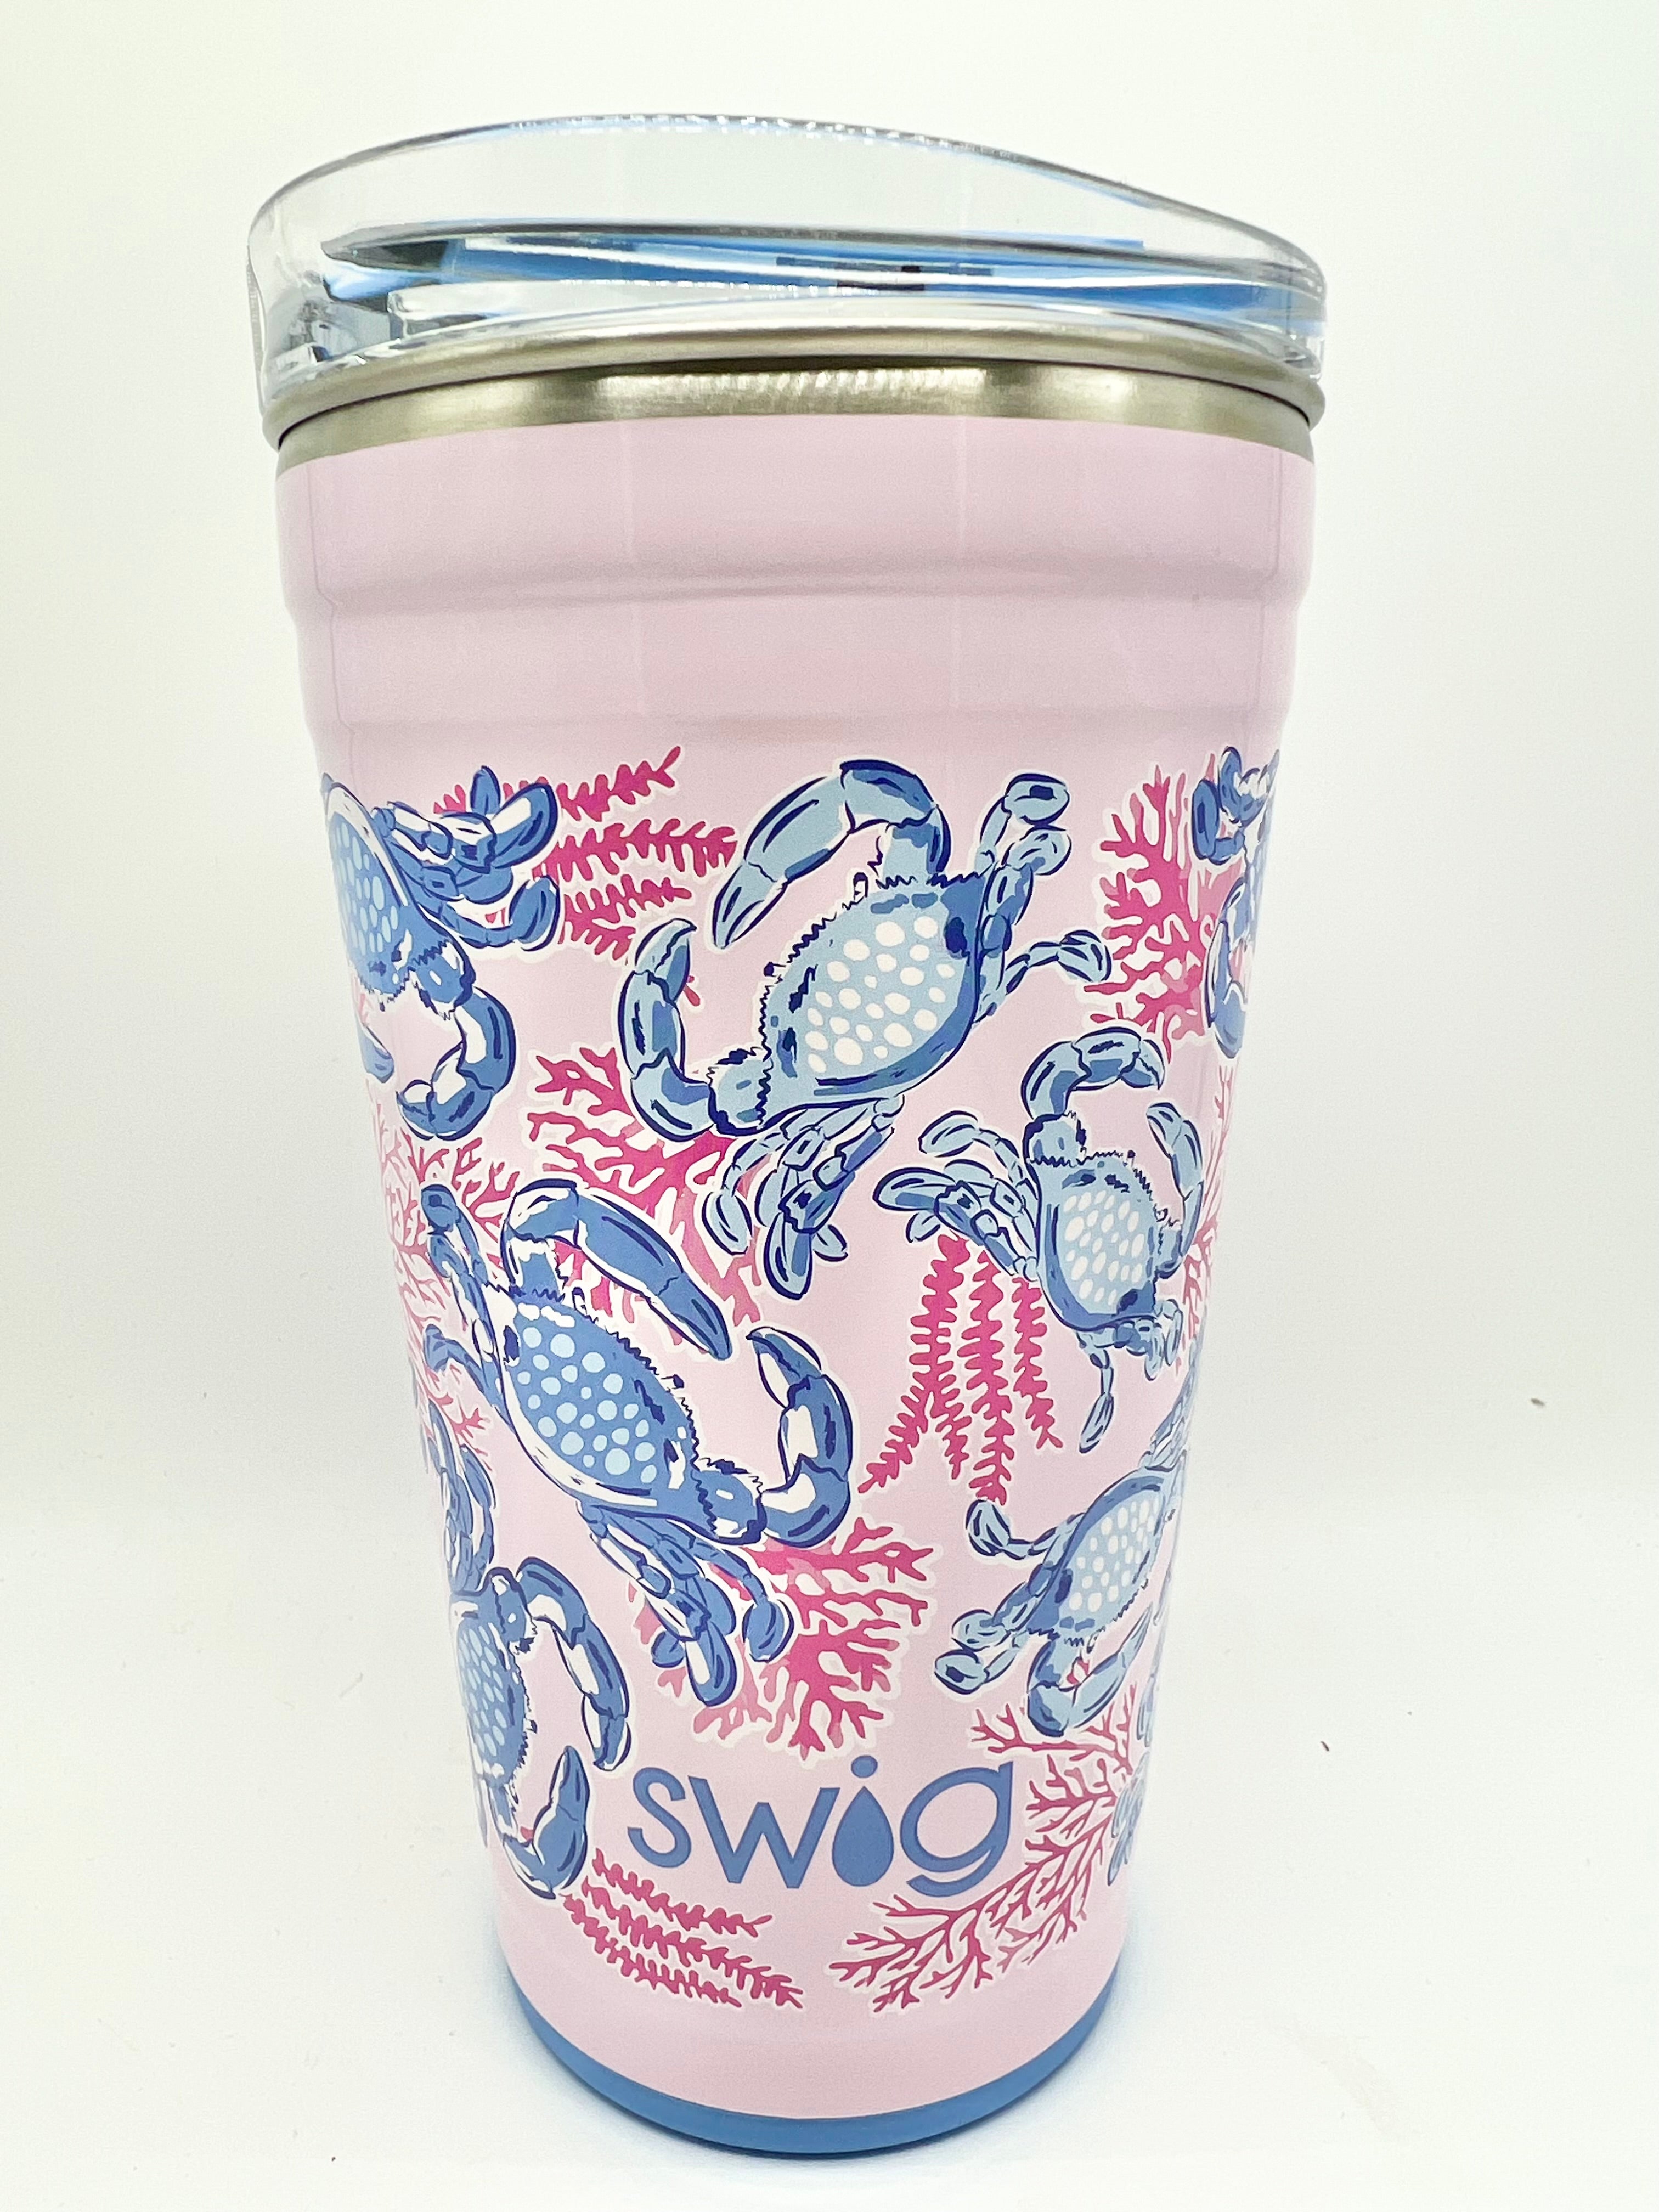 Get Crackin’ Swig-340 Other Accessories-Swig-Heathered Boho Boutique, Women's Fashion and Accessories in Palmetto, FL